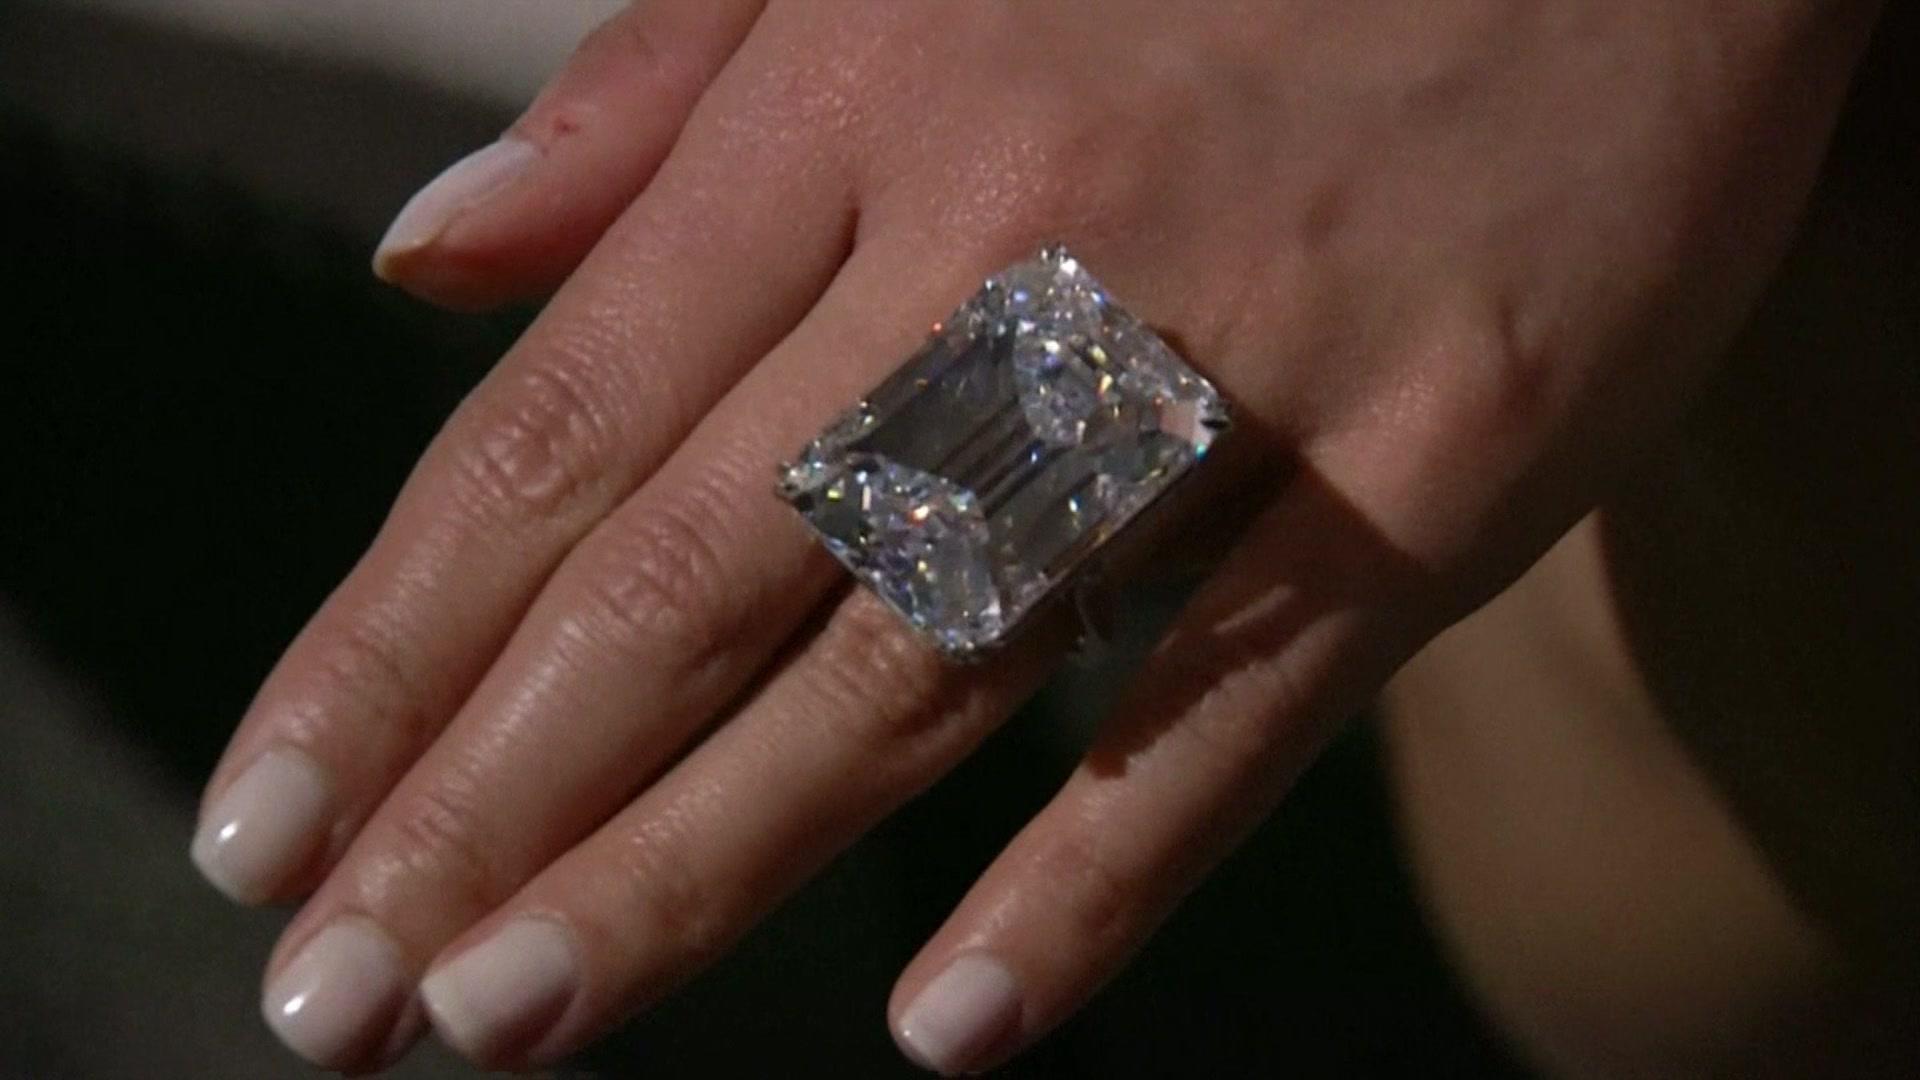 A shopper spent $600,000 on a diamond engagement ring at Costco | Fake  diamond, Diamond engagement rings, Engagement rings